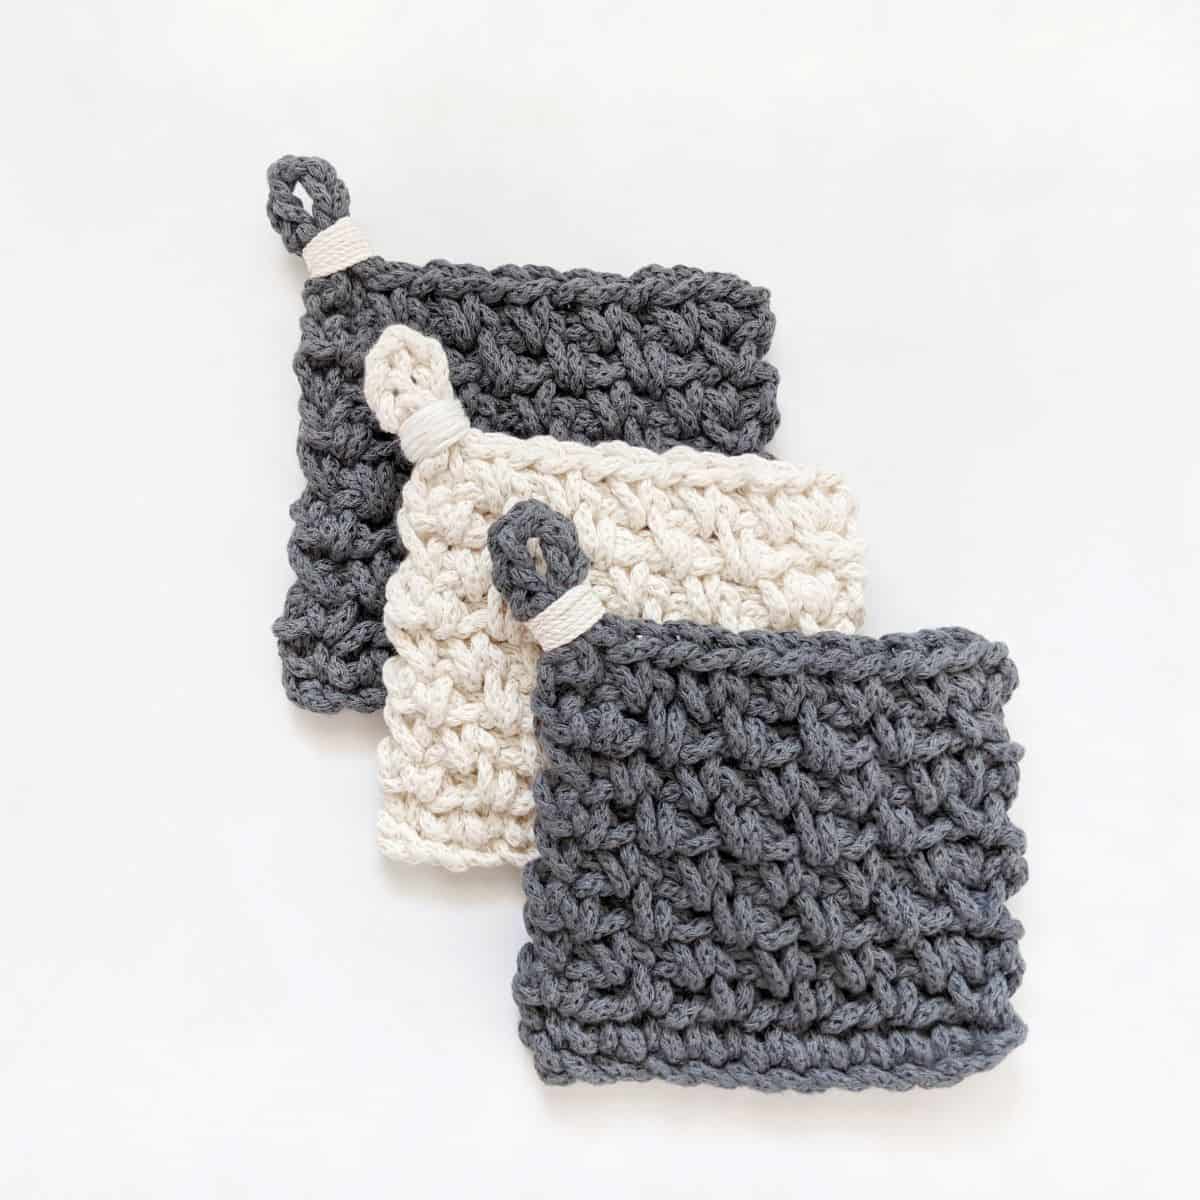 3 modern chunky crochet coasters made with cotton yarn in the color white and blue